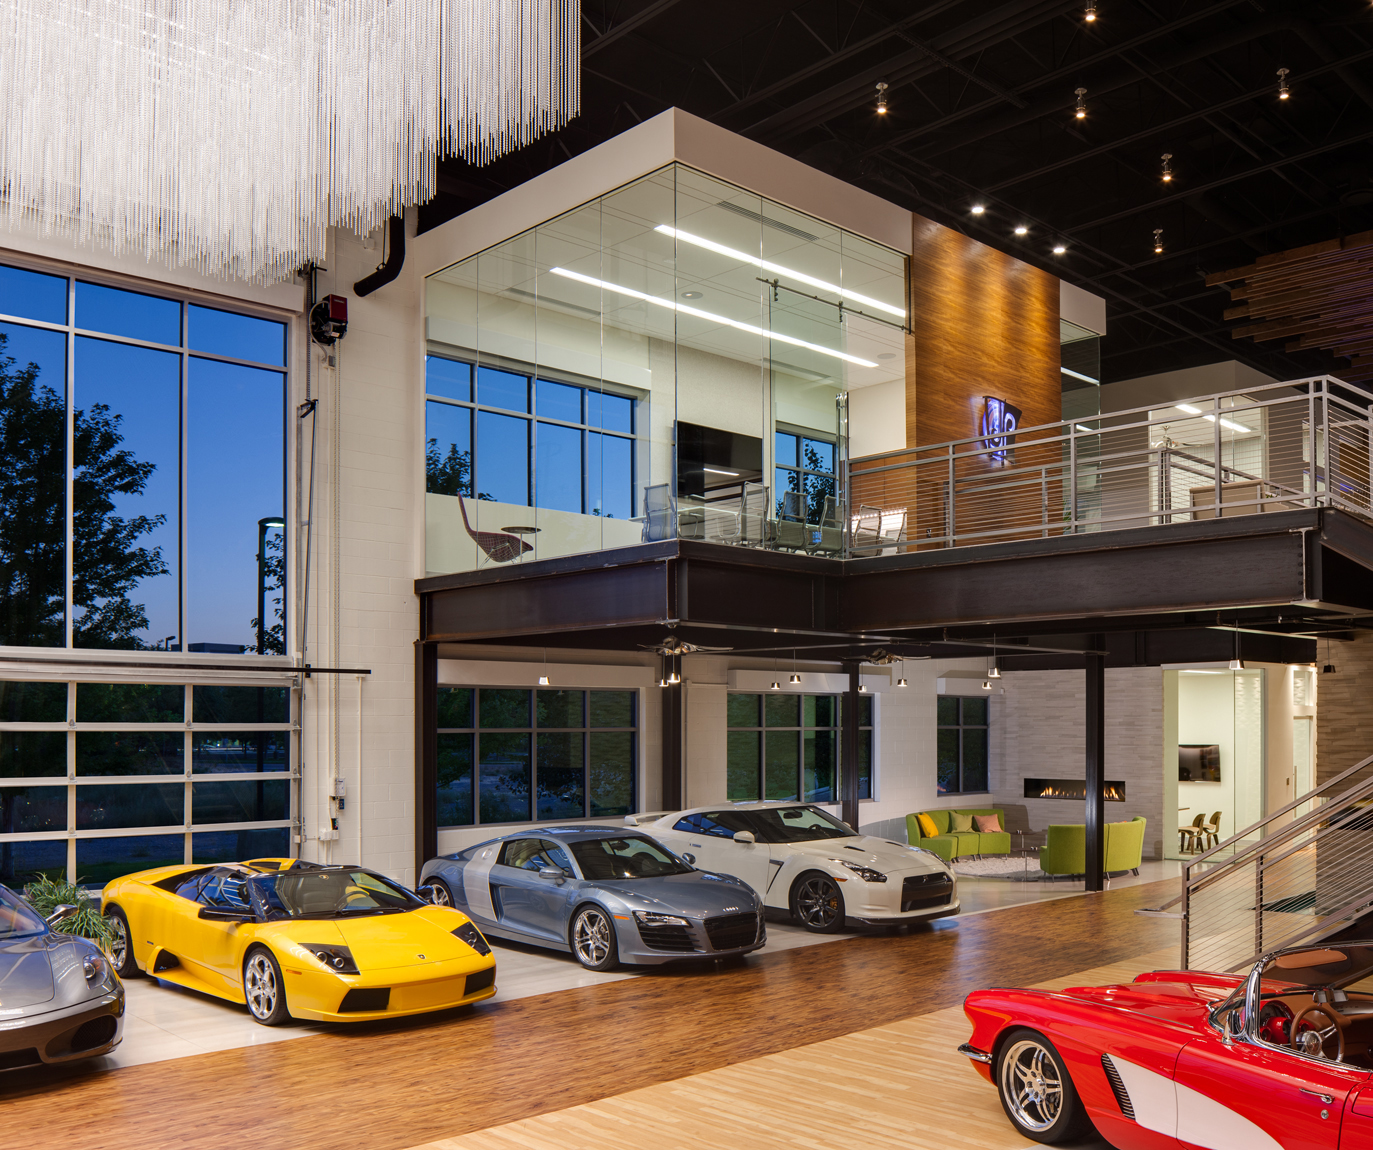 Commercial Office Studio featuring car collection with Corvette, Ferrari and Porche. Photo includes large windows with dusk light and second level conference room all with a modern style. 